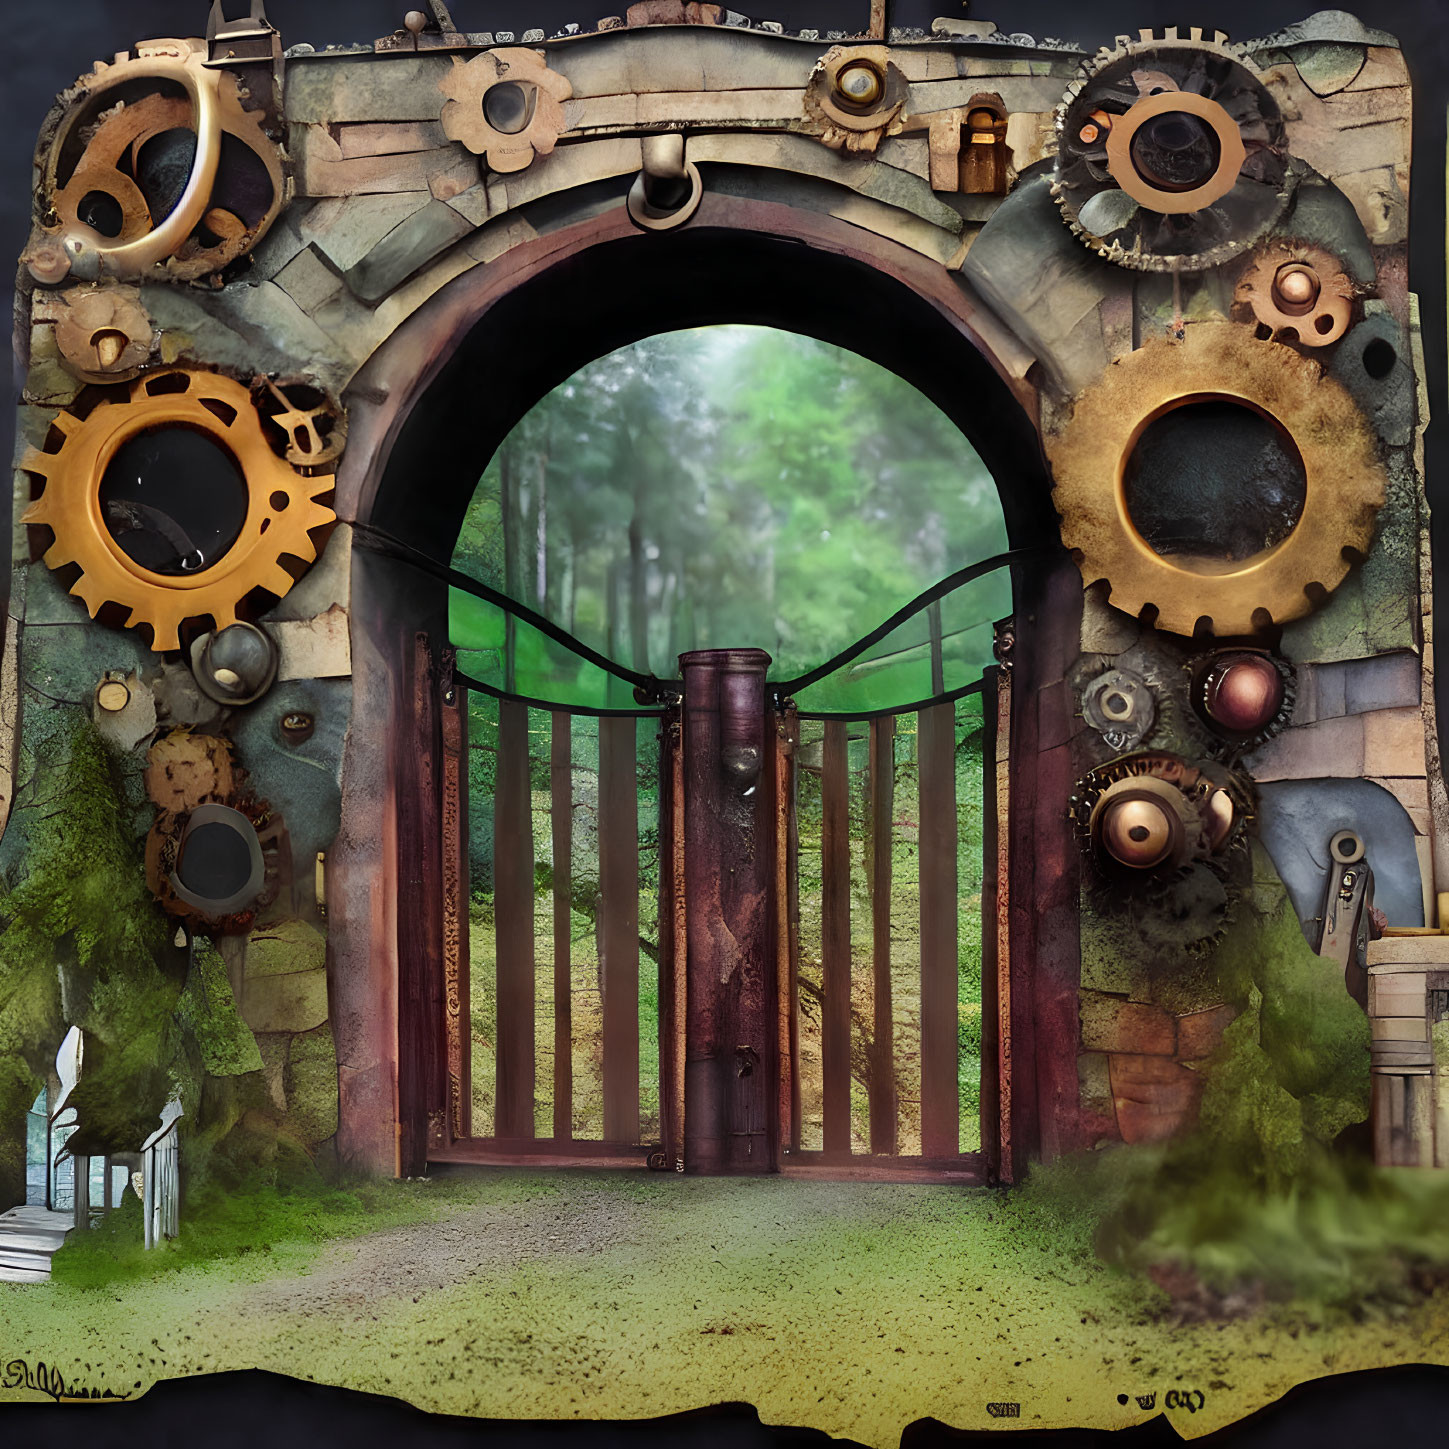 Steampunk-style gate with rustic gears in stone archway opening to forest landscape